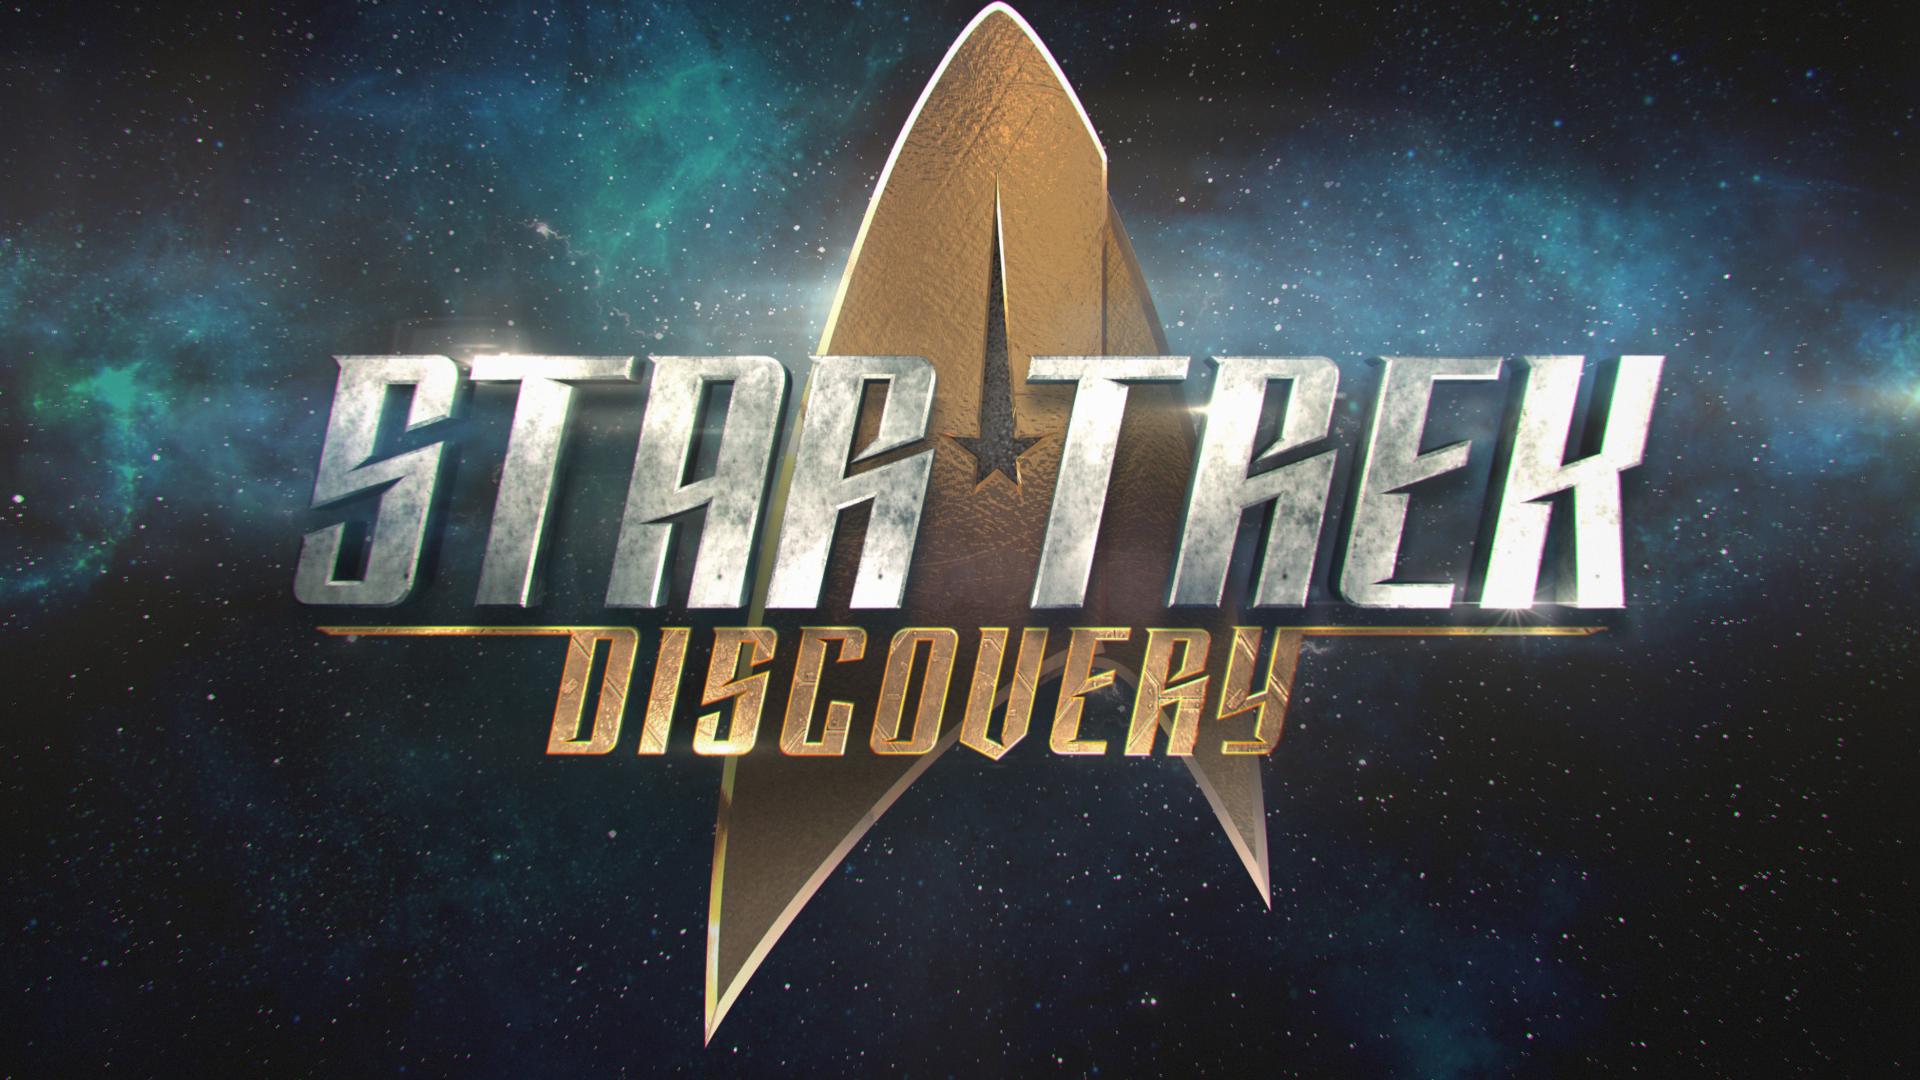 The official logo of STAR TREK: DISCOVERY premiering on CBS All Access and CBS Television Network.